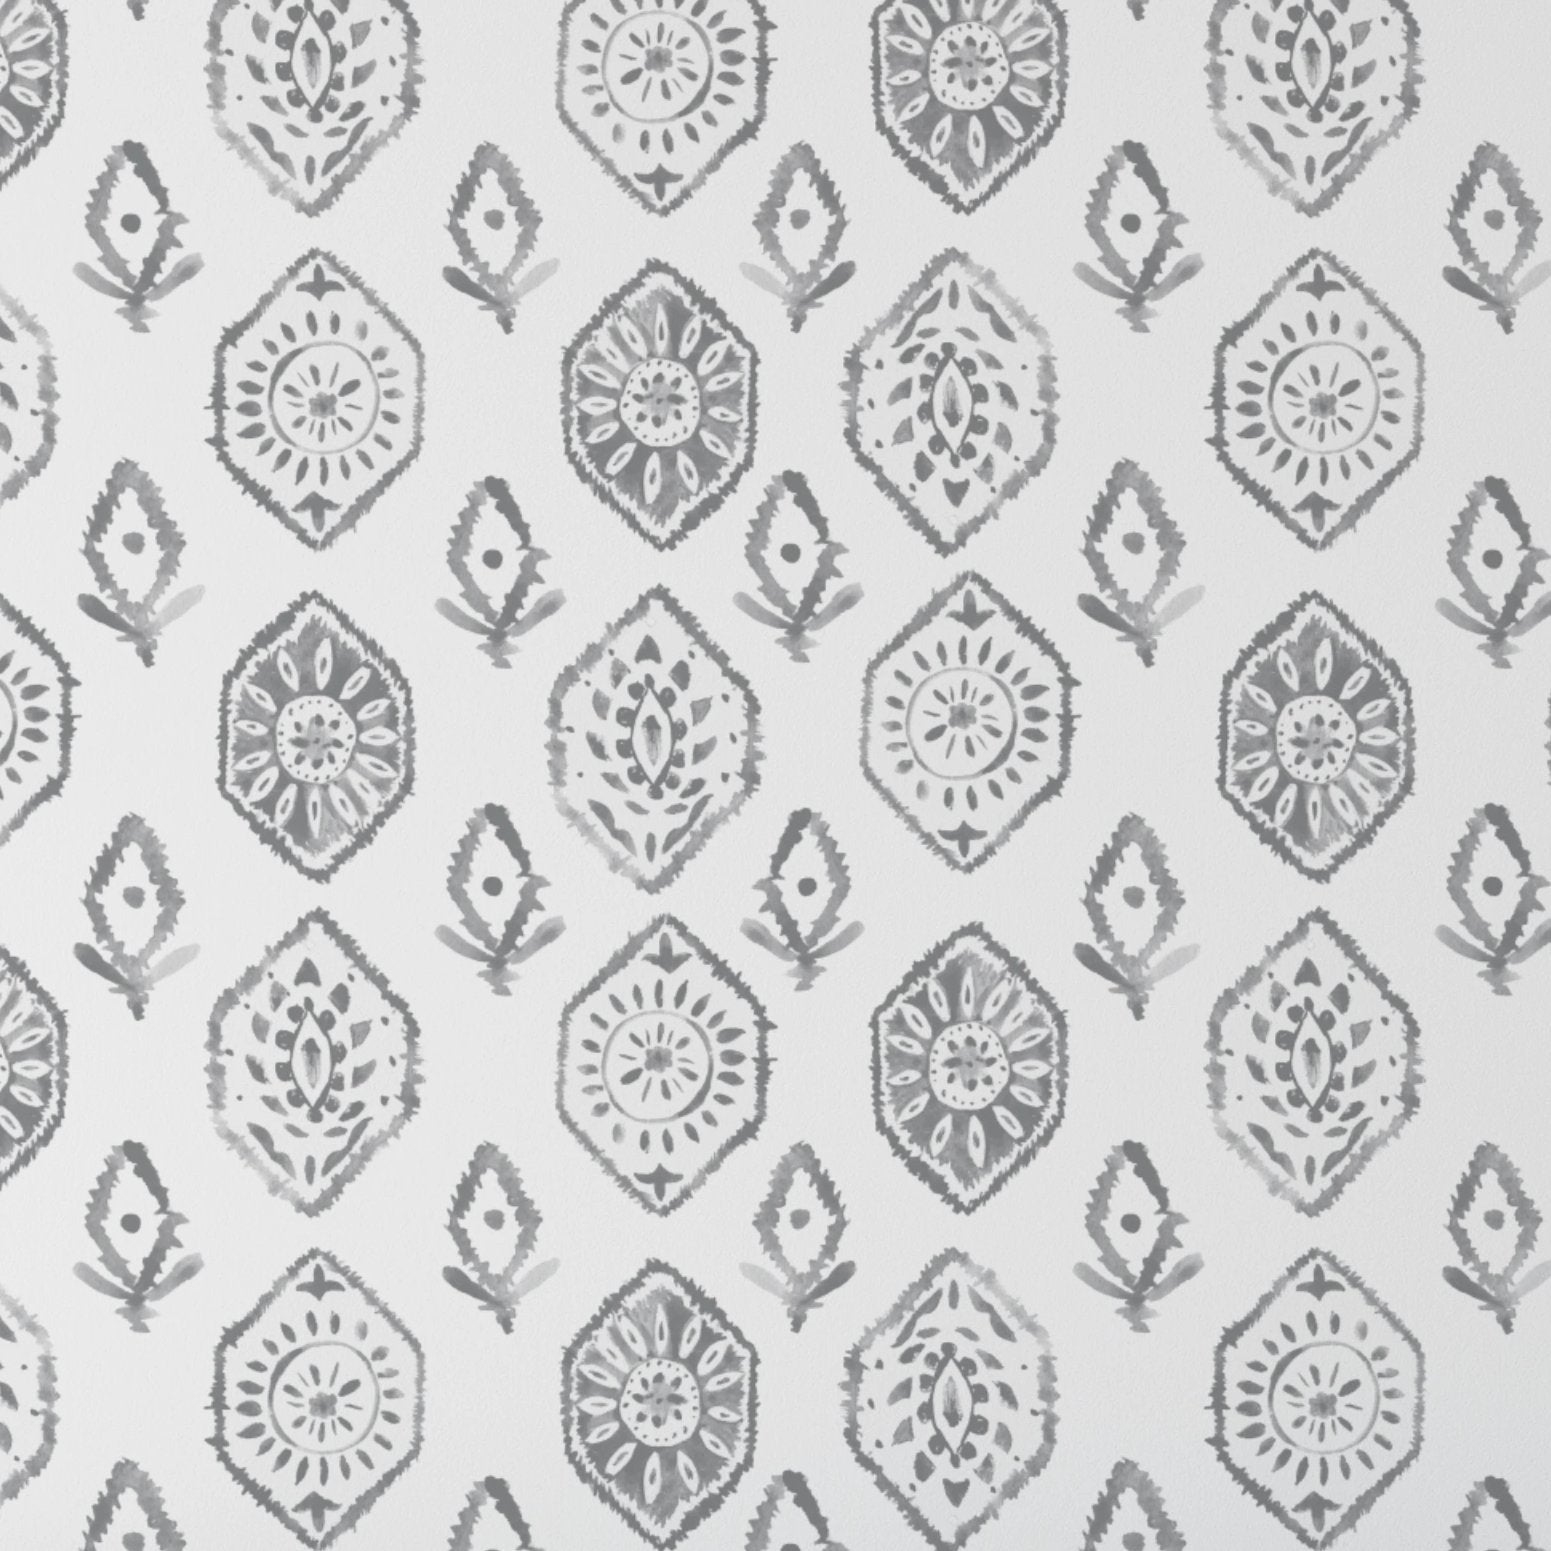 An up-close view of the Moroccan Tile Wallpaper IX, displaying a detailed pattern of gray Moroccan tile motifs on a white background, offering a modern take on traditional design